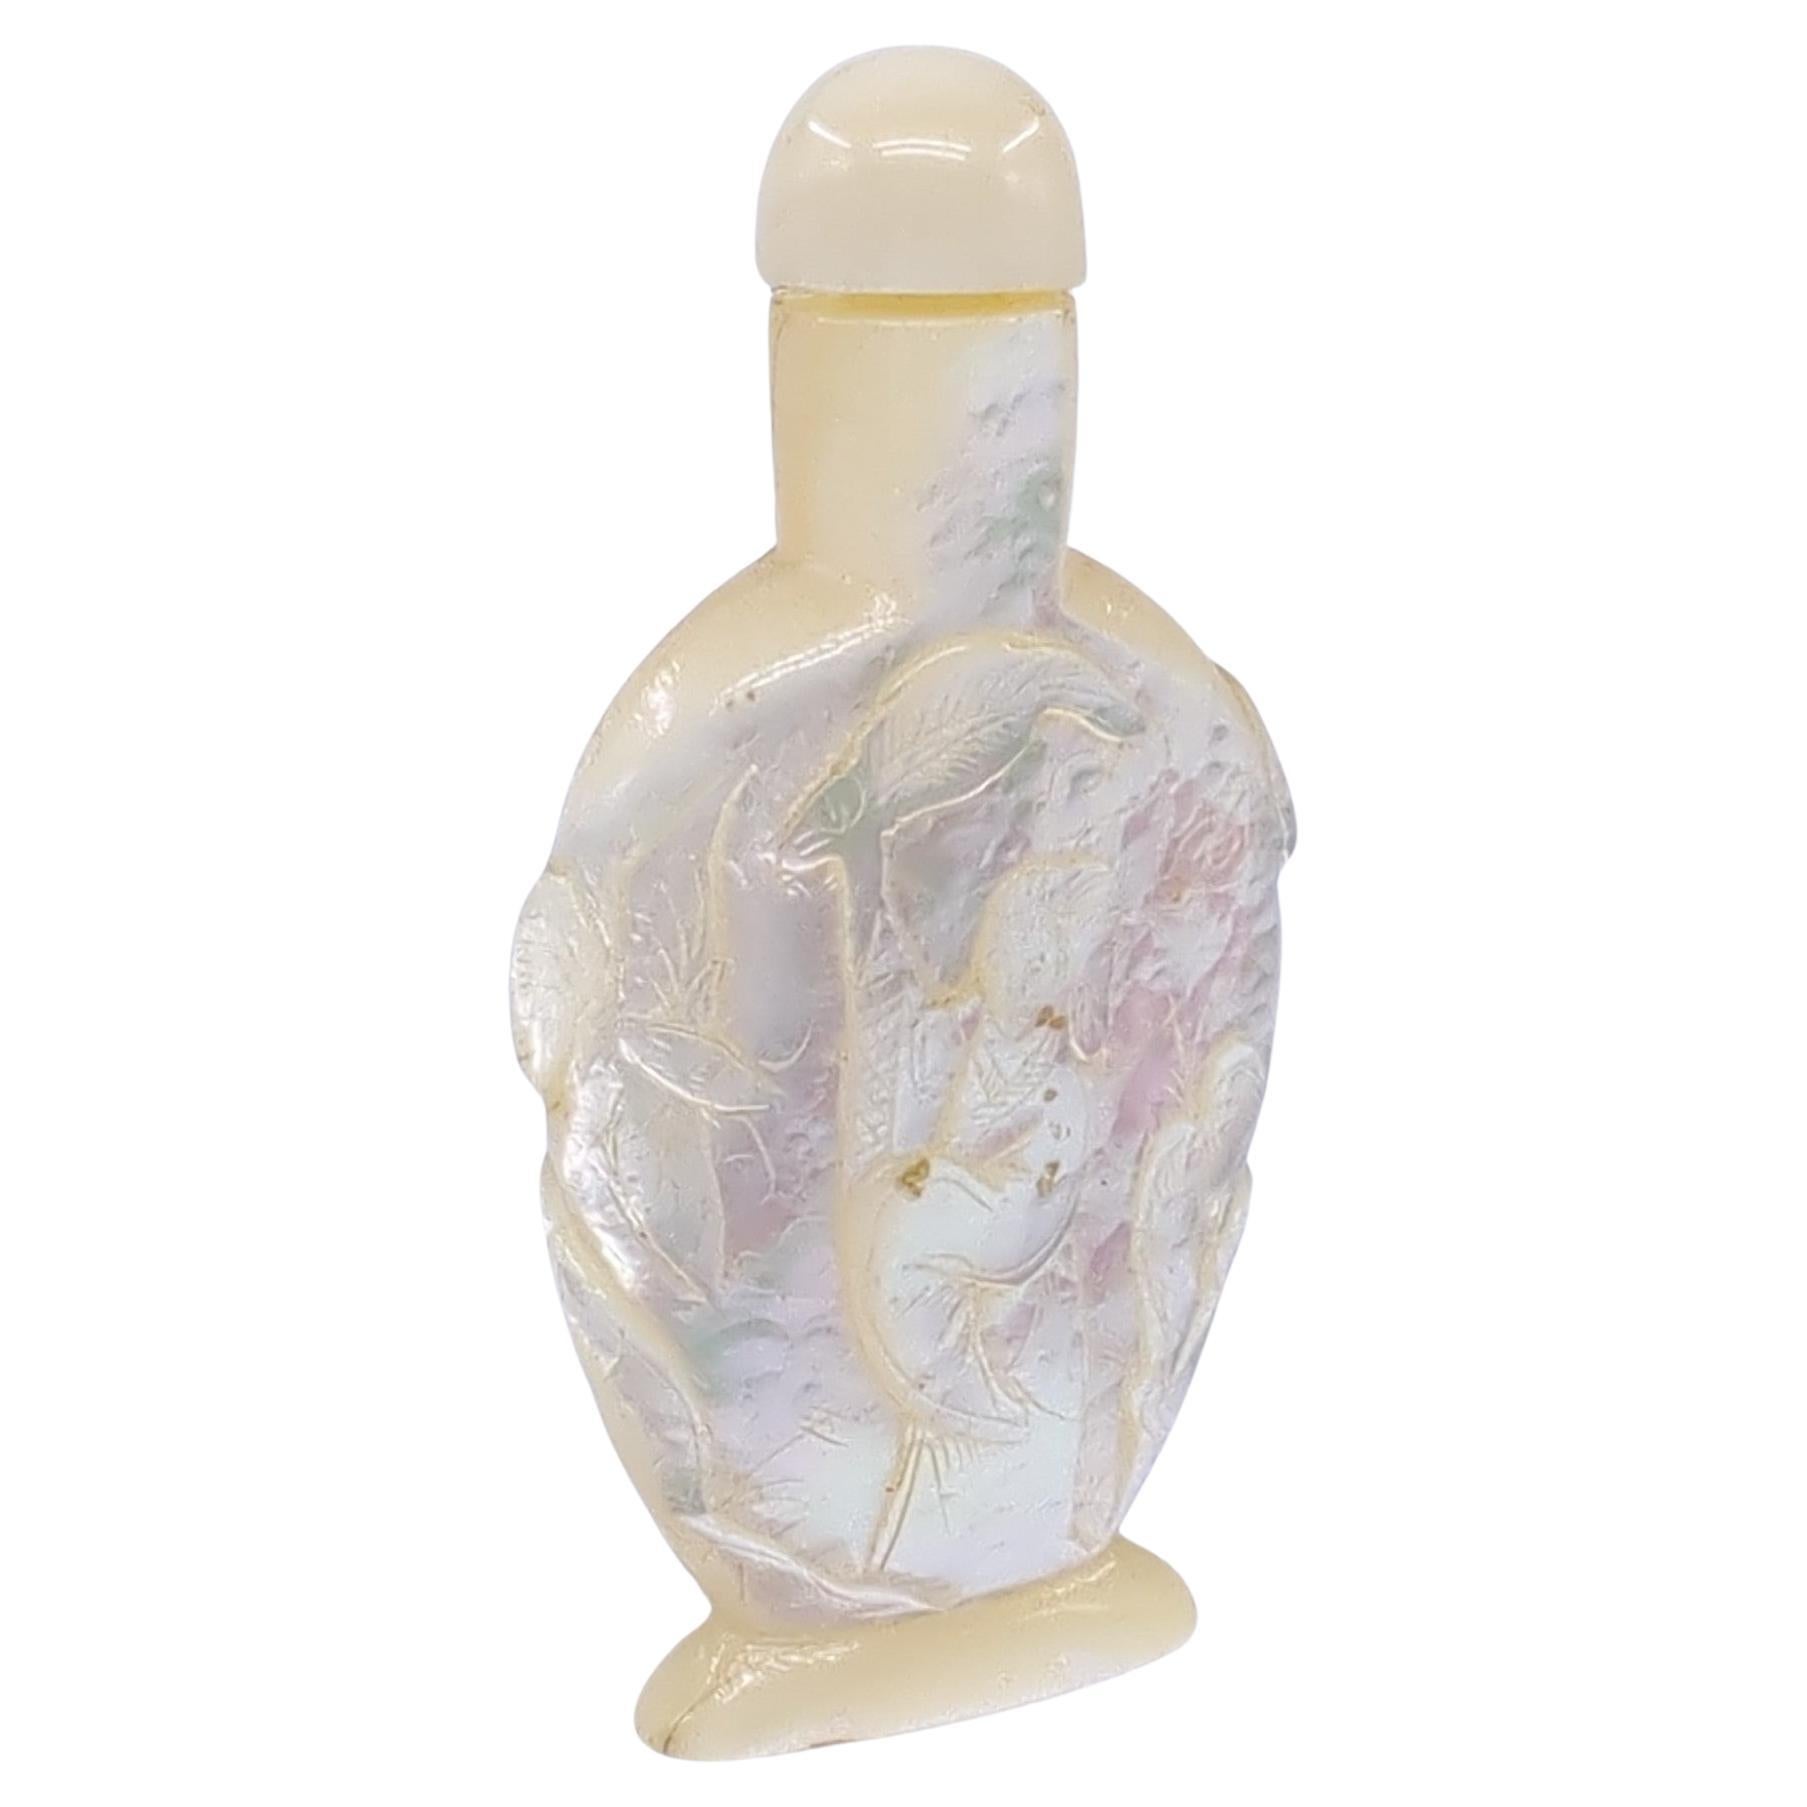 Antique Chinese Cameo Carved Mother-Of-Pearl MOP Snuff Bottle PRoC 5/6/7 period In Good Condition For Sale In Richmond, CA